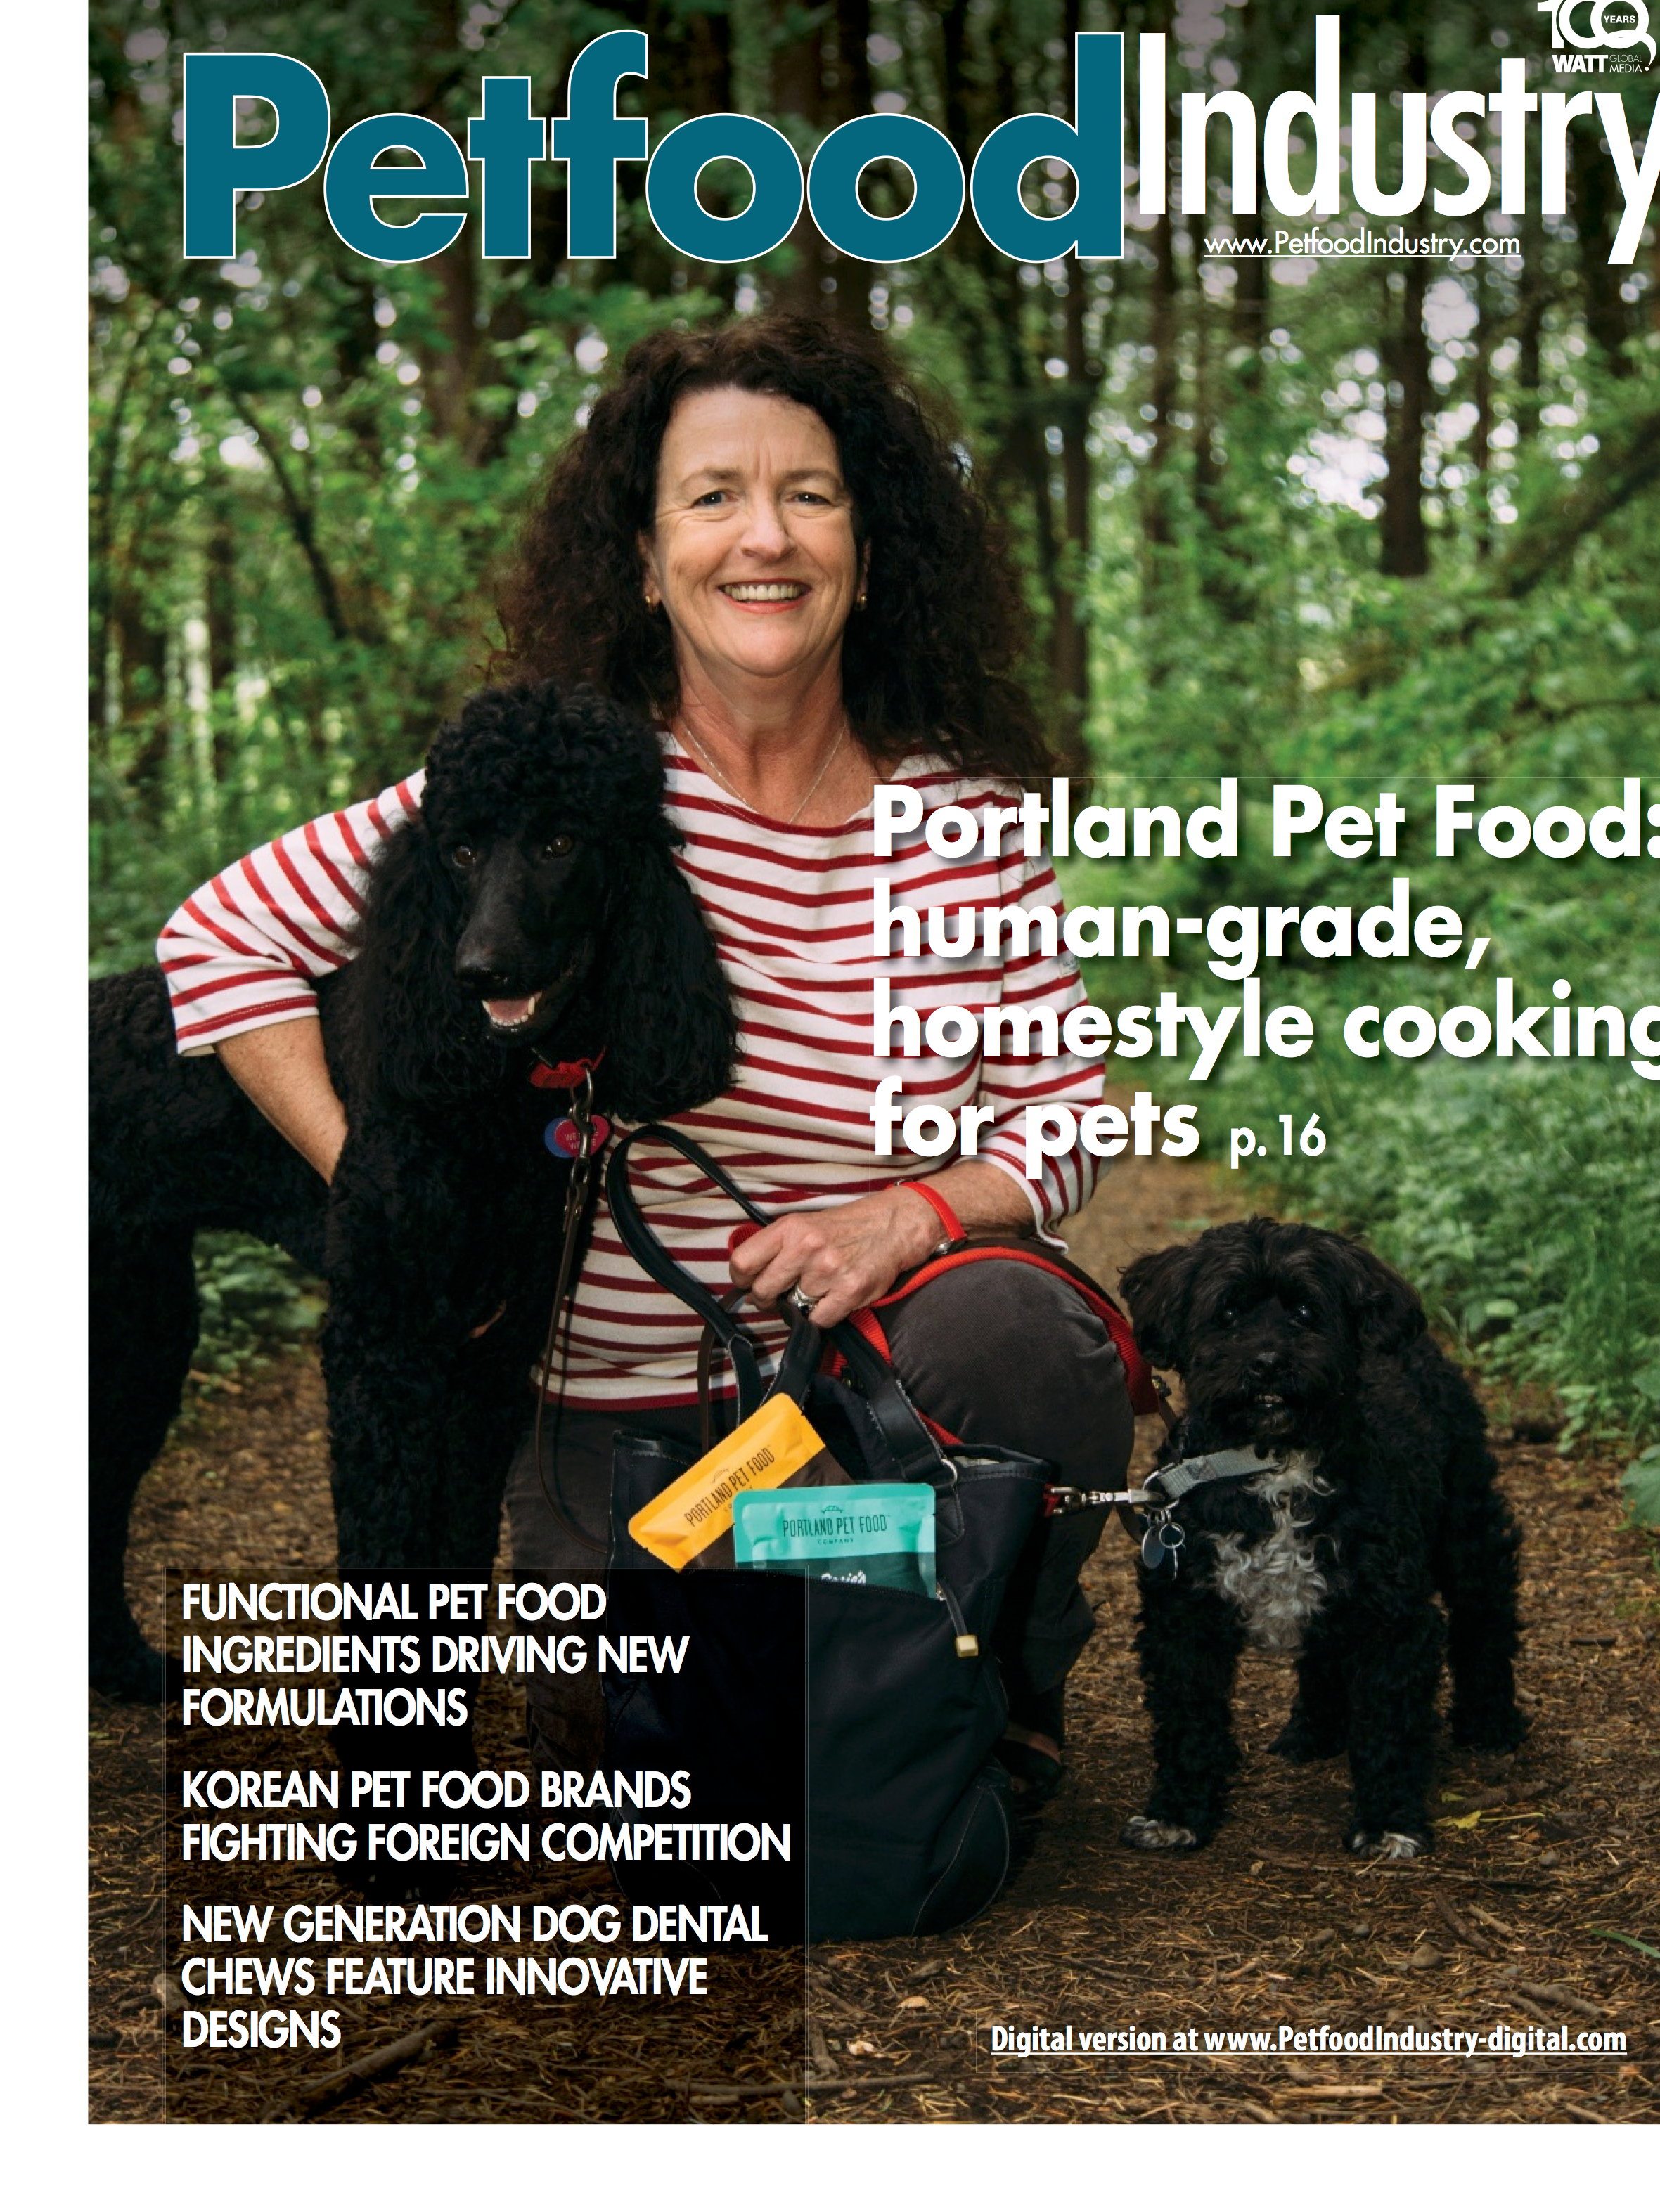 Portland Pet Food Company Makes the Cover of Petfood Industry Magazine!